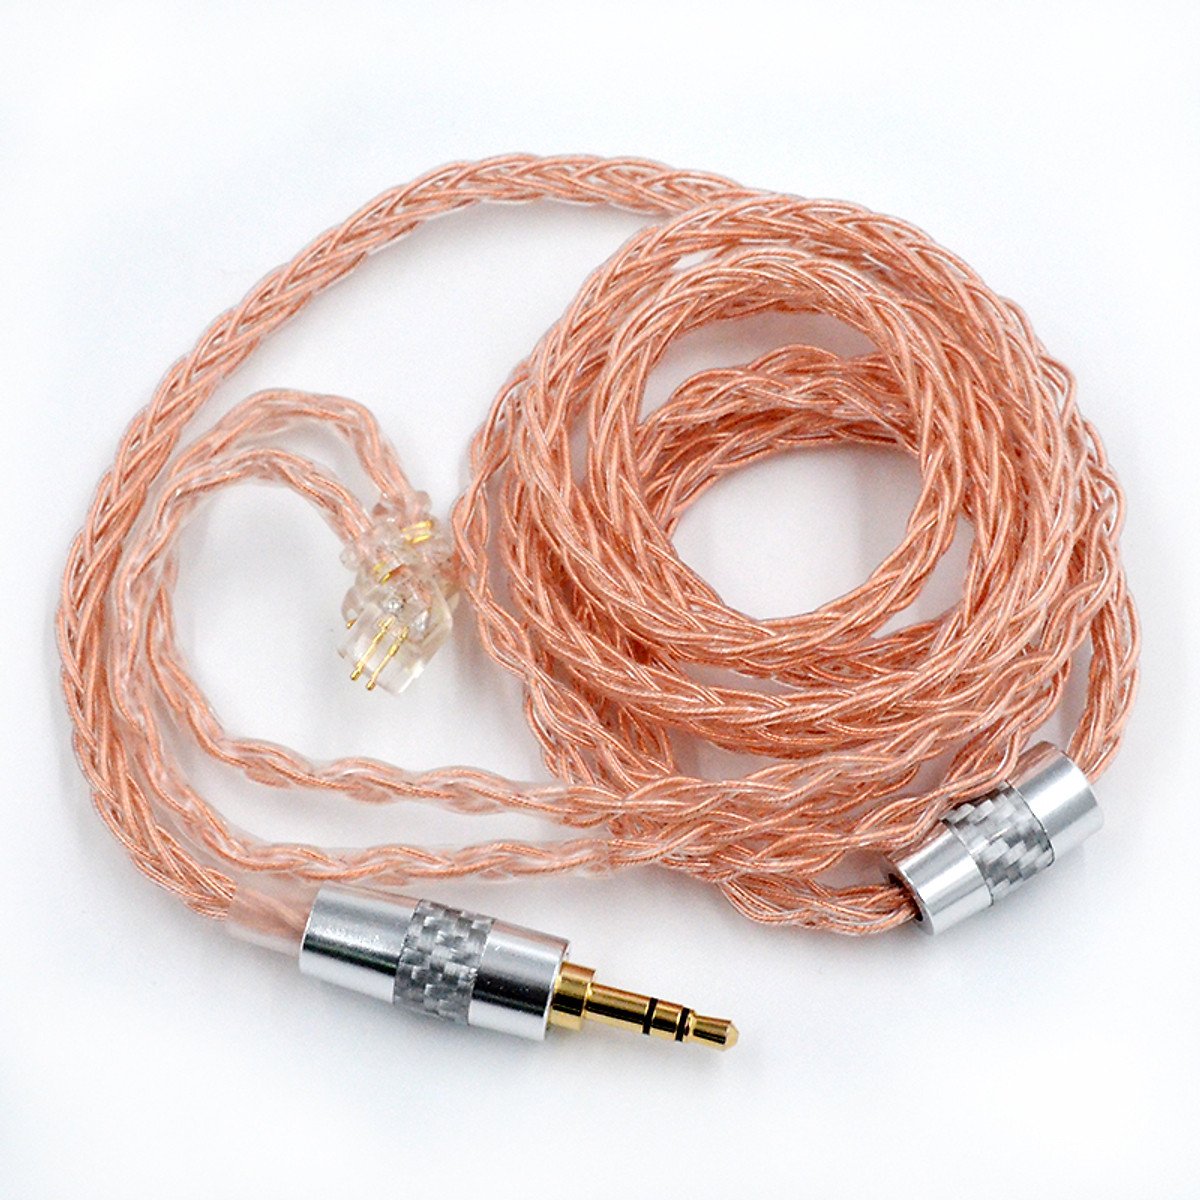 KZ - 90-6 High resolution cable OFC Free - Copper